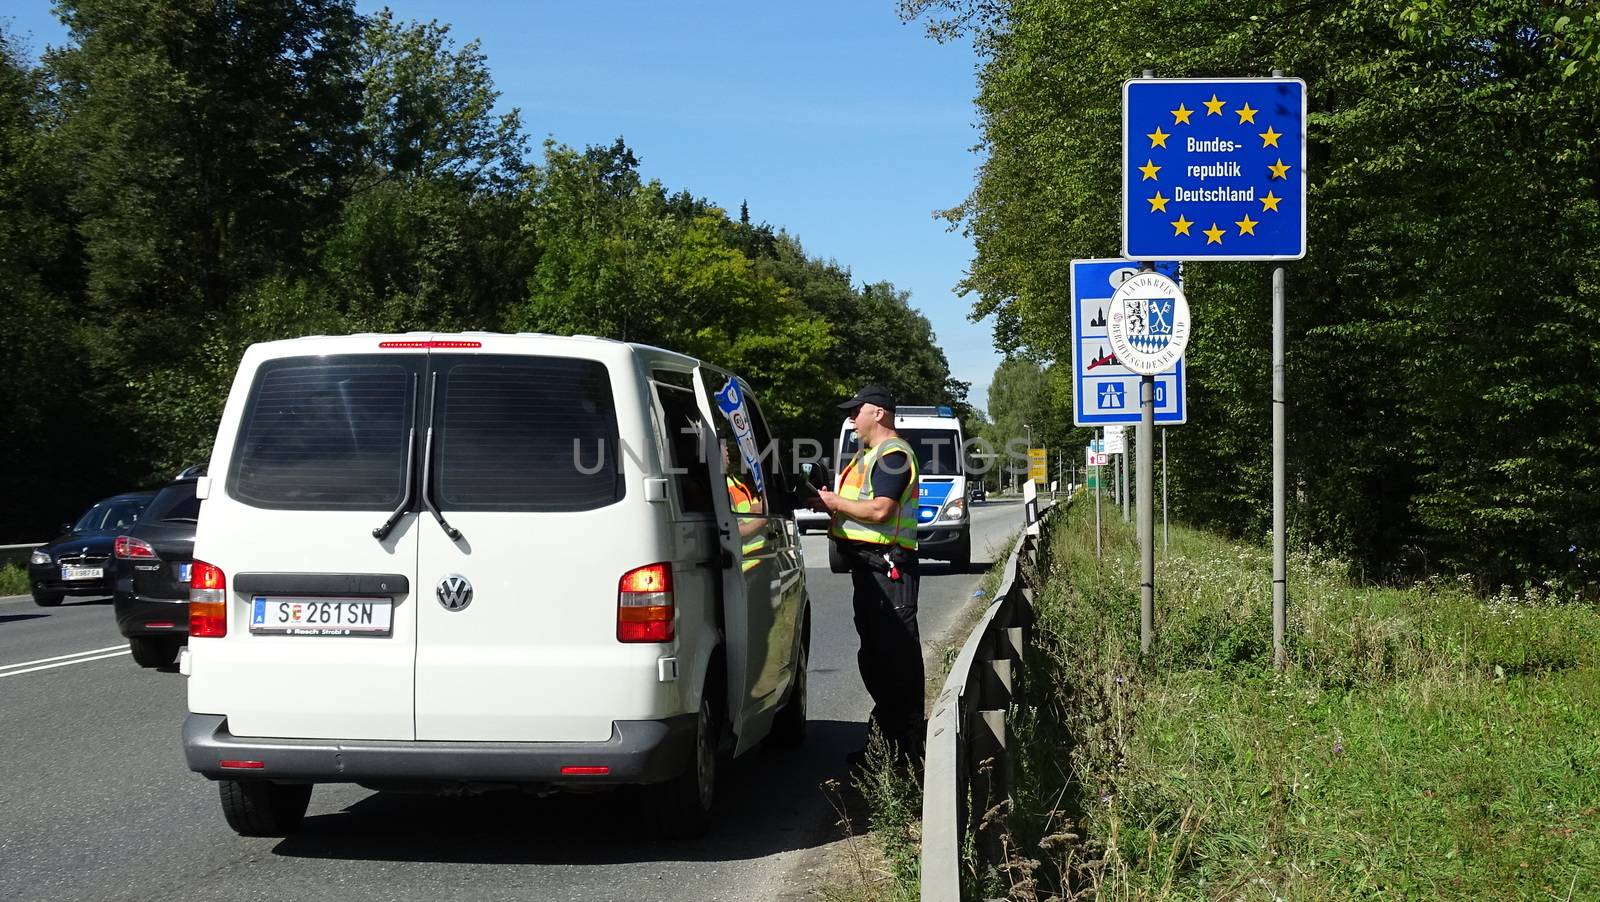 GERMANY, Freilassing: A German policeman speaks with a passenger of a car in Freilassing, Bavaria, on the German side of the Germany-Austria border, September 16, 2015.